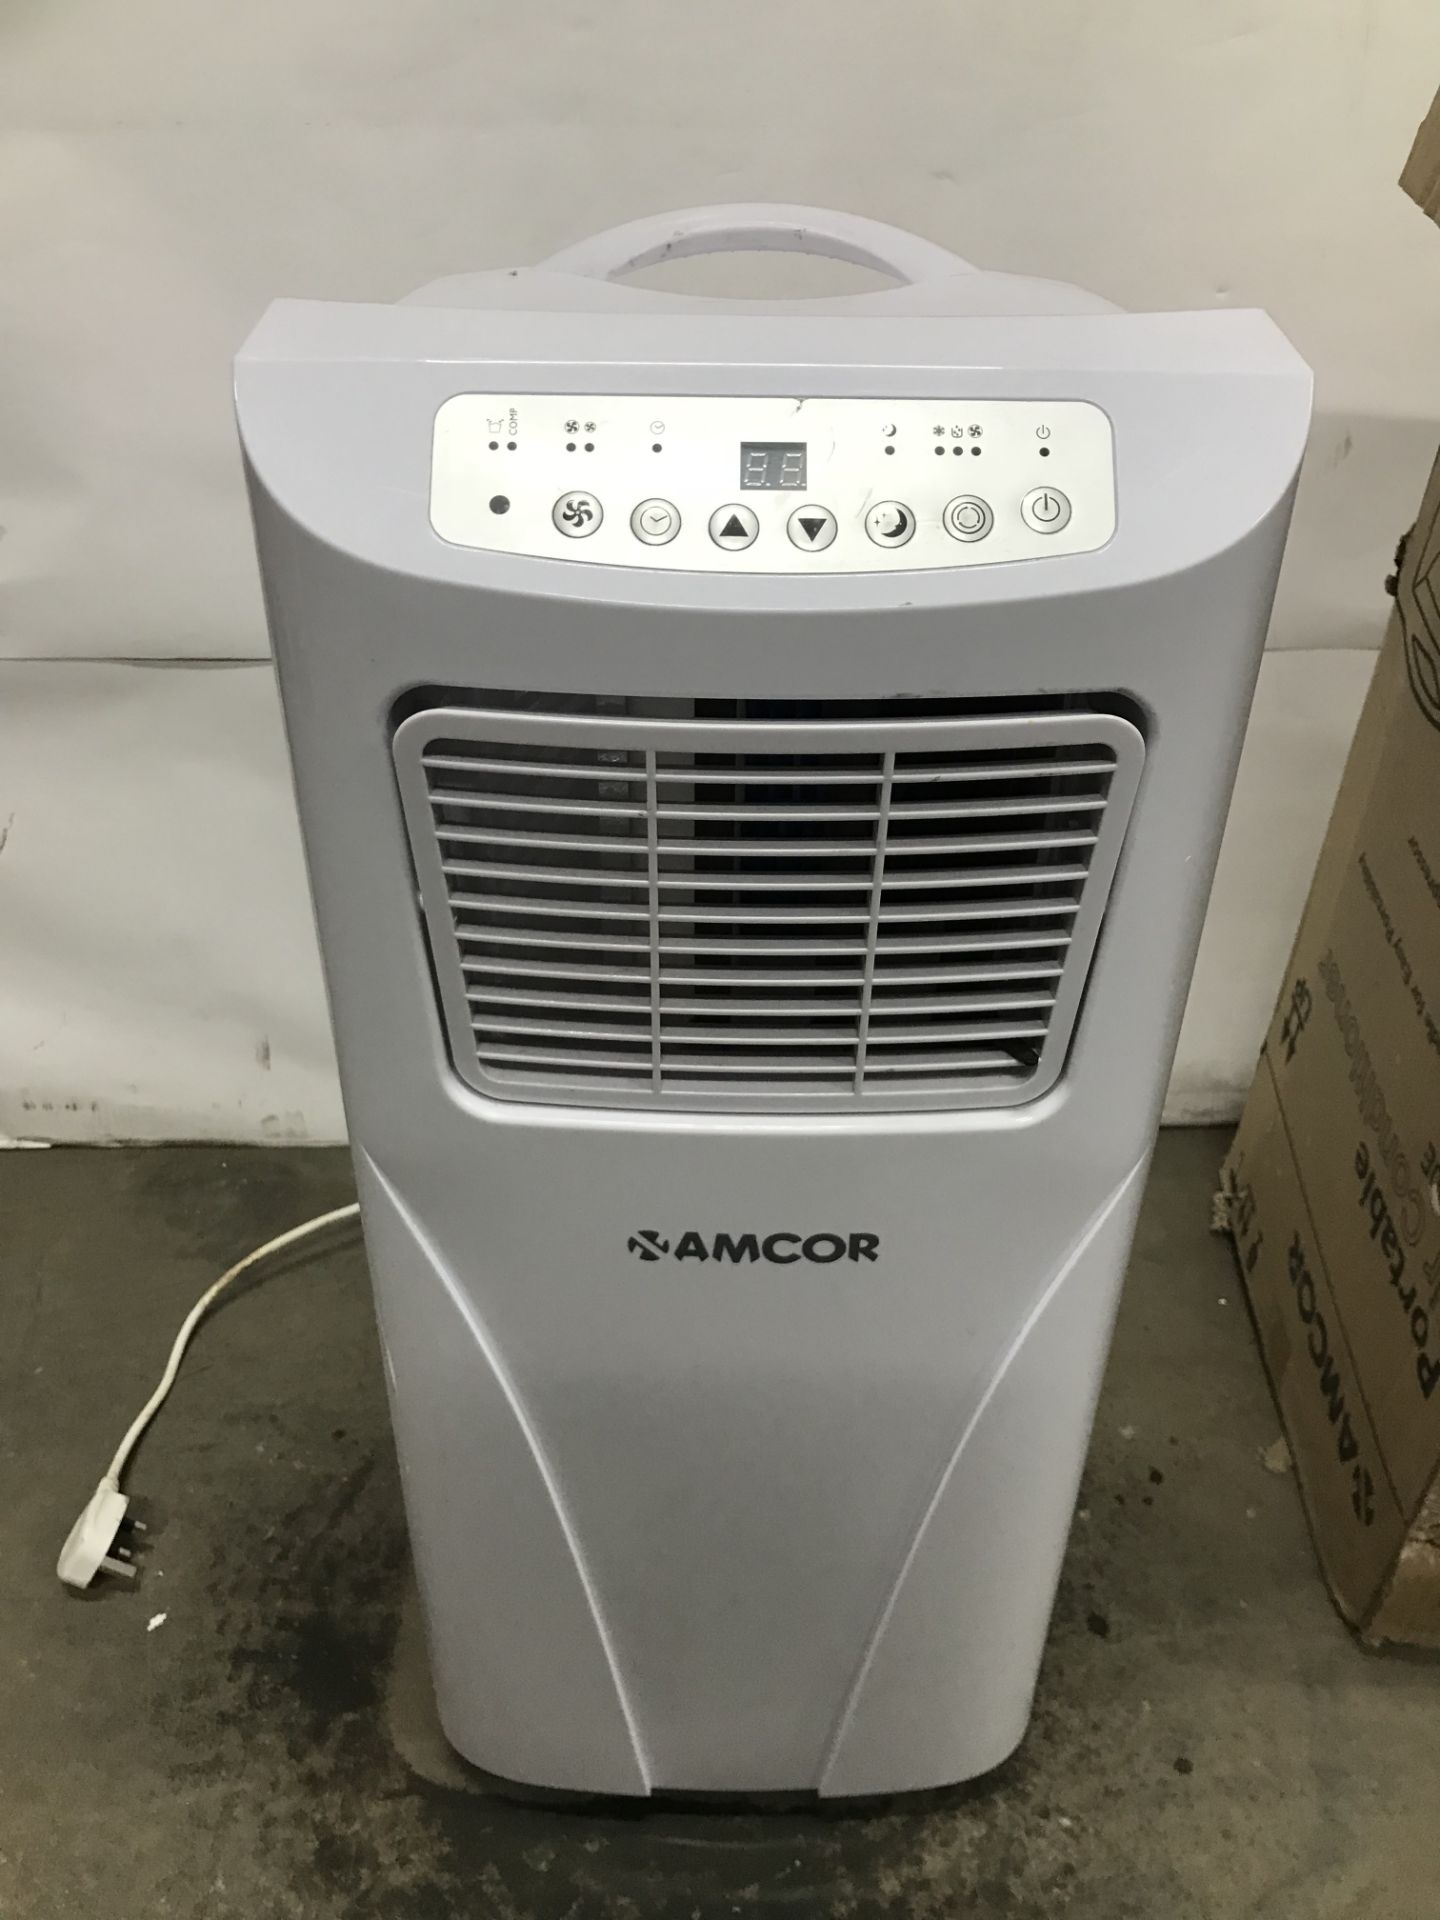 3 x Amcor SF10000E Portable Air Conditioning Units - Image 4 of 7